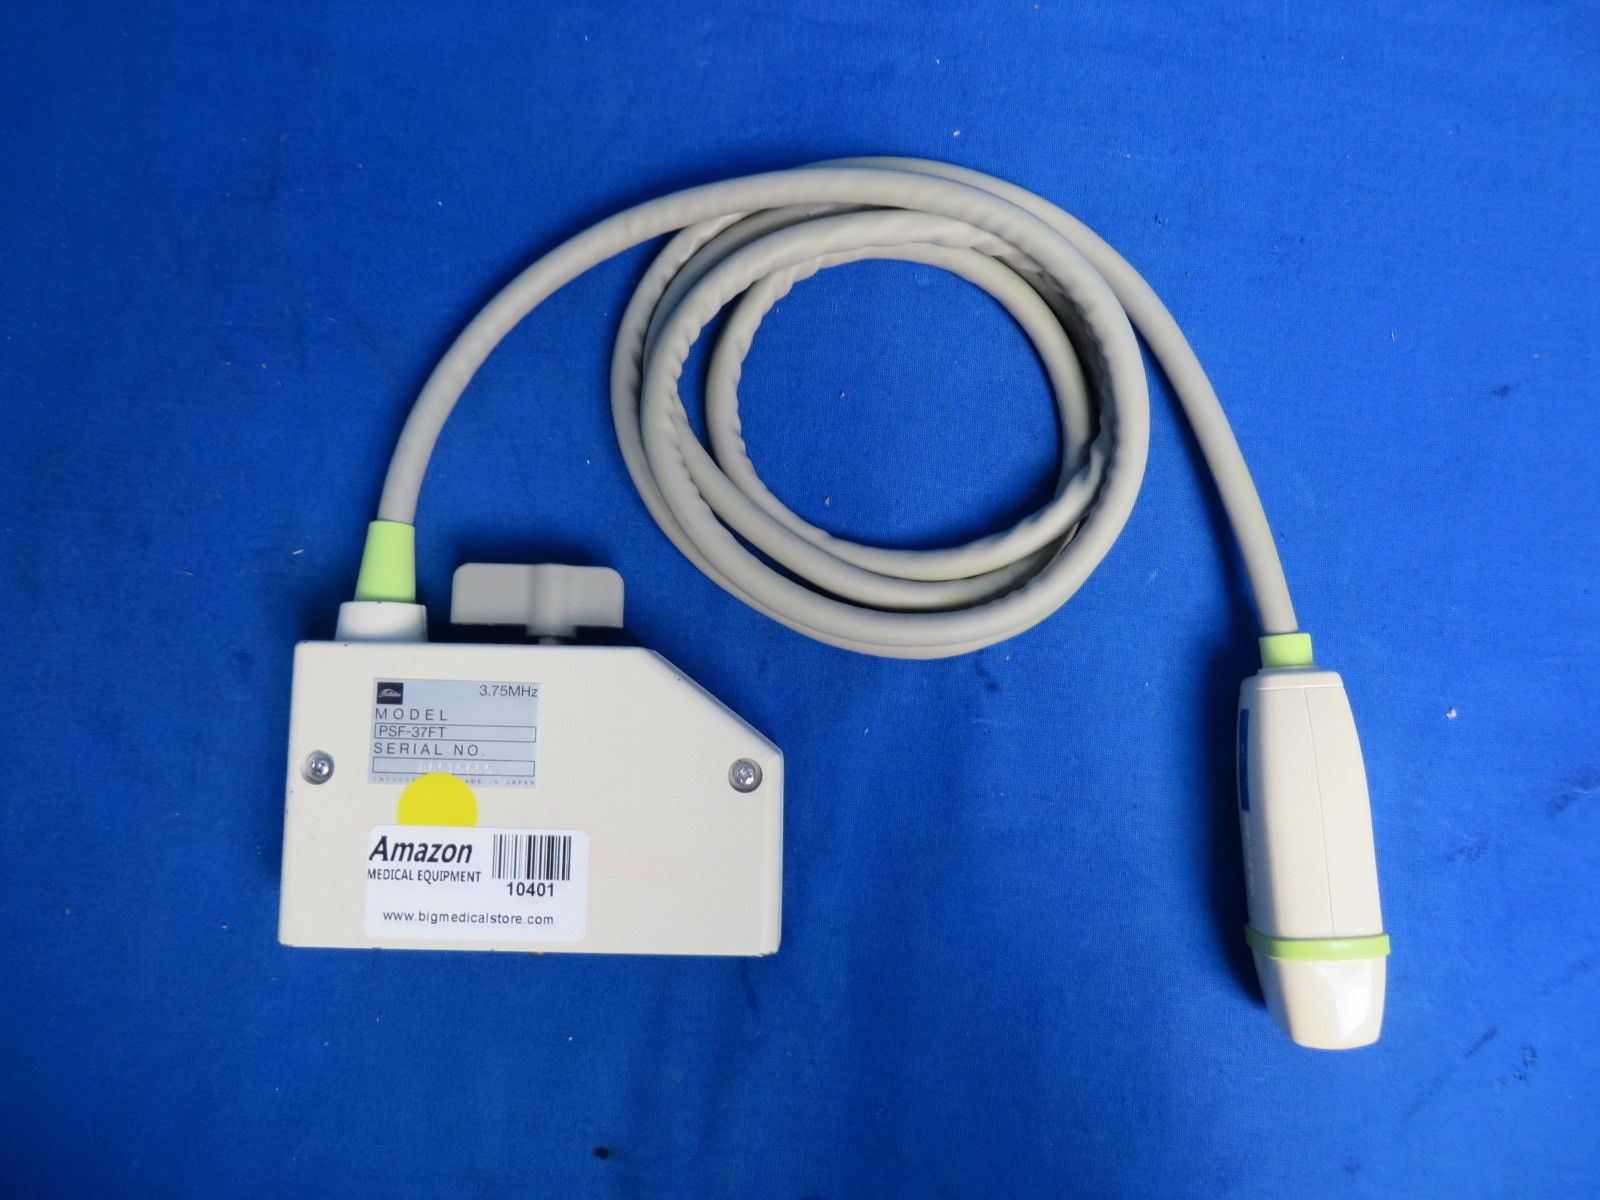 Toshiba PSF-37FT 3.75 MHz Phased Array Sector Probe for SSA-160A, SSH-270A DIAGNOSTIC ULTRASOUND MACHINES FOR SALE